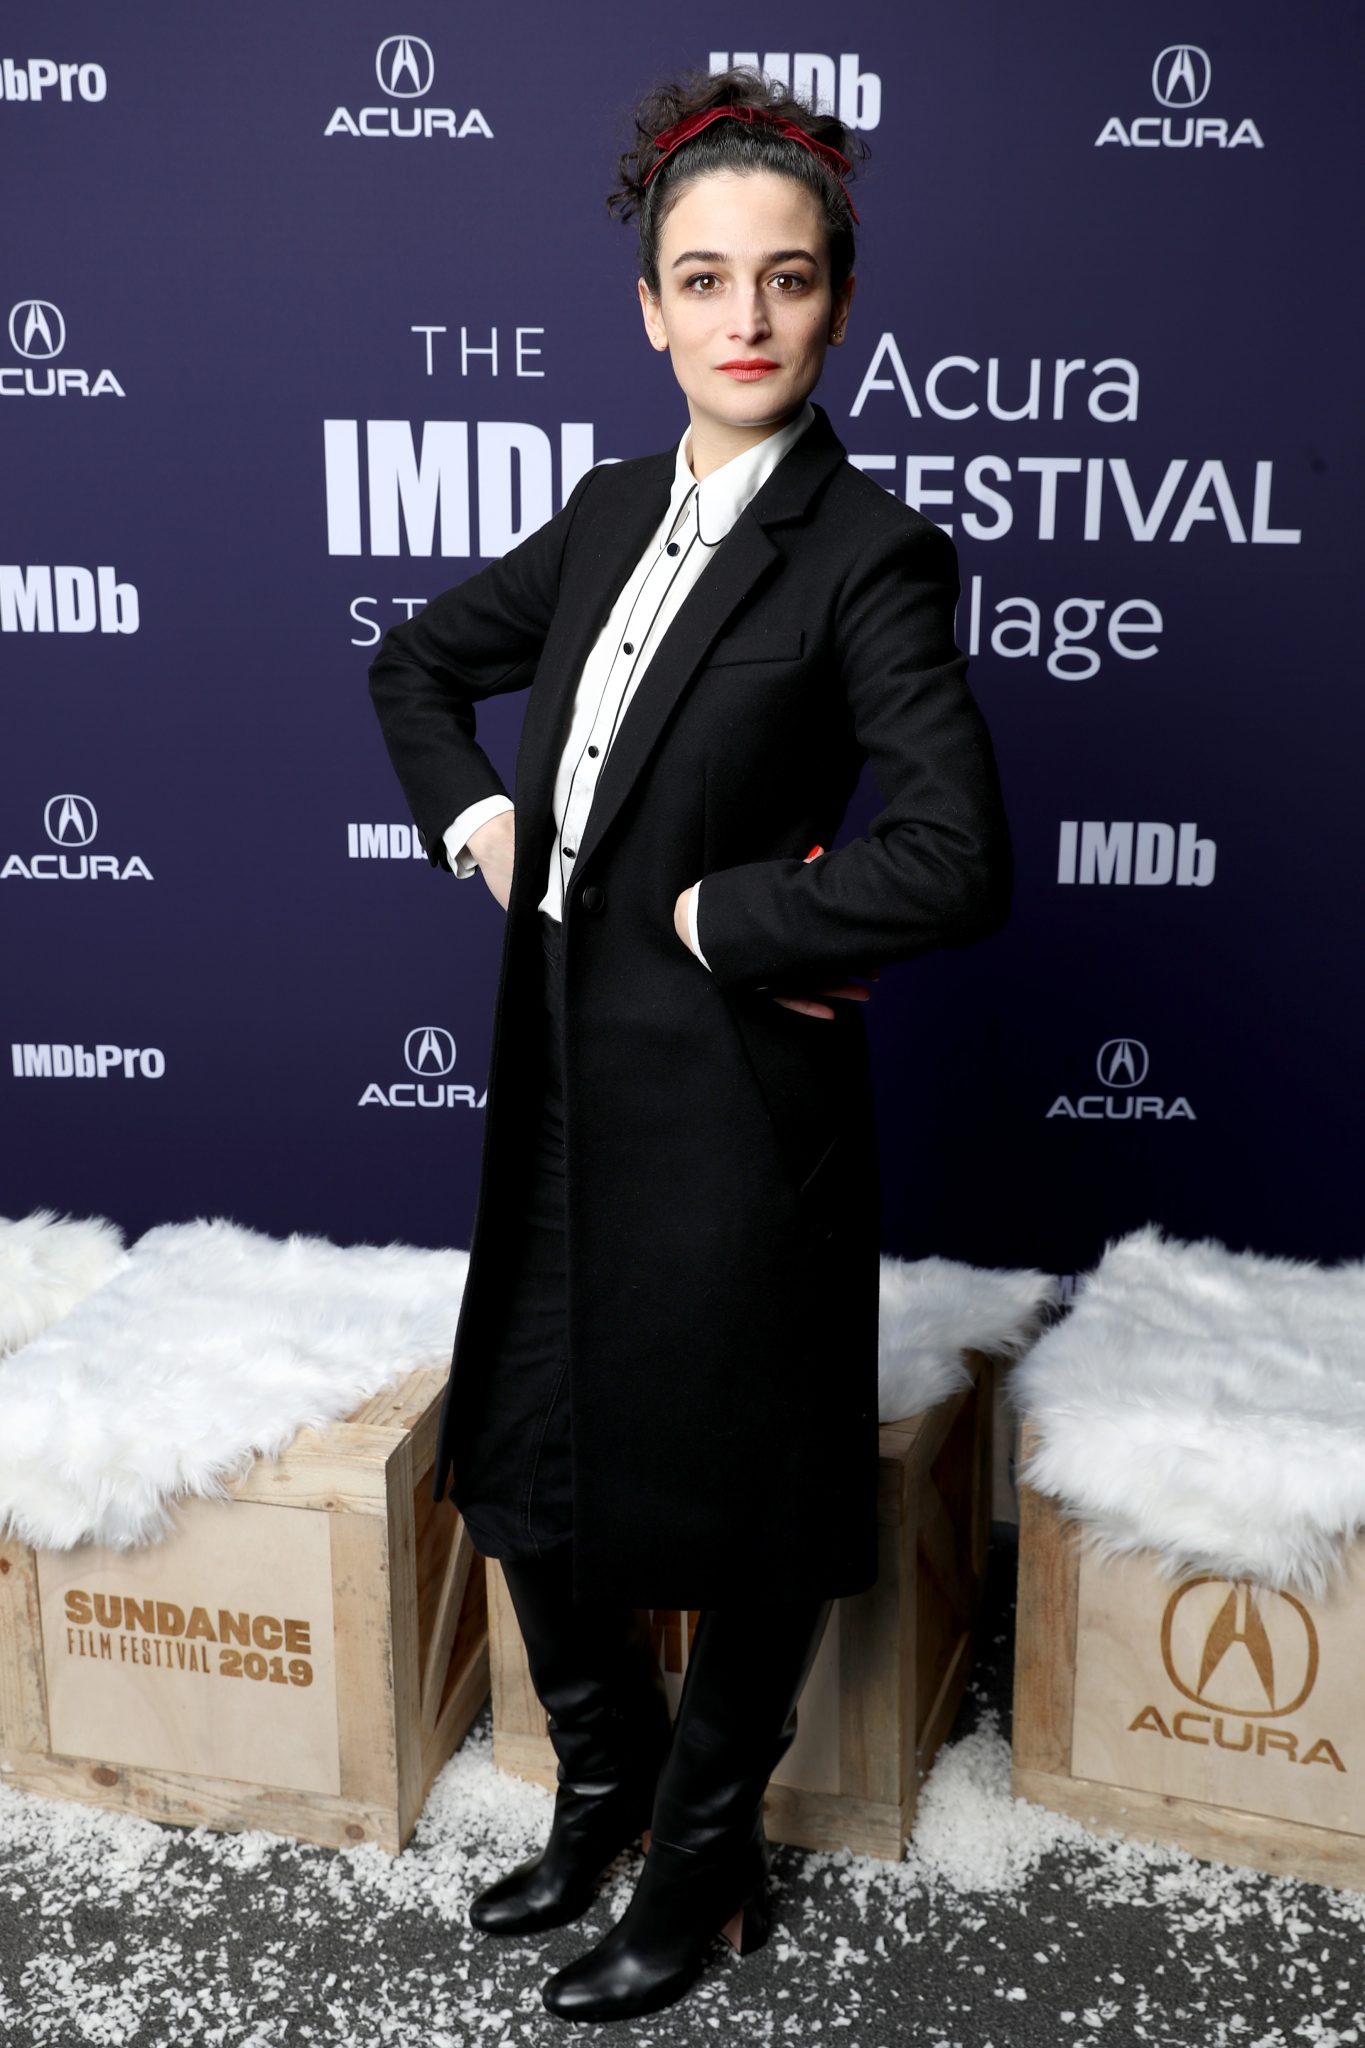 Sundance 2019 Step and Repeat Photo Moment